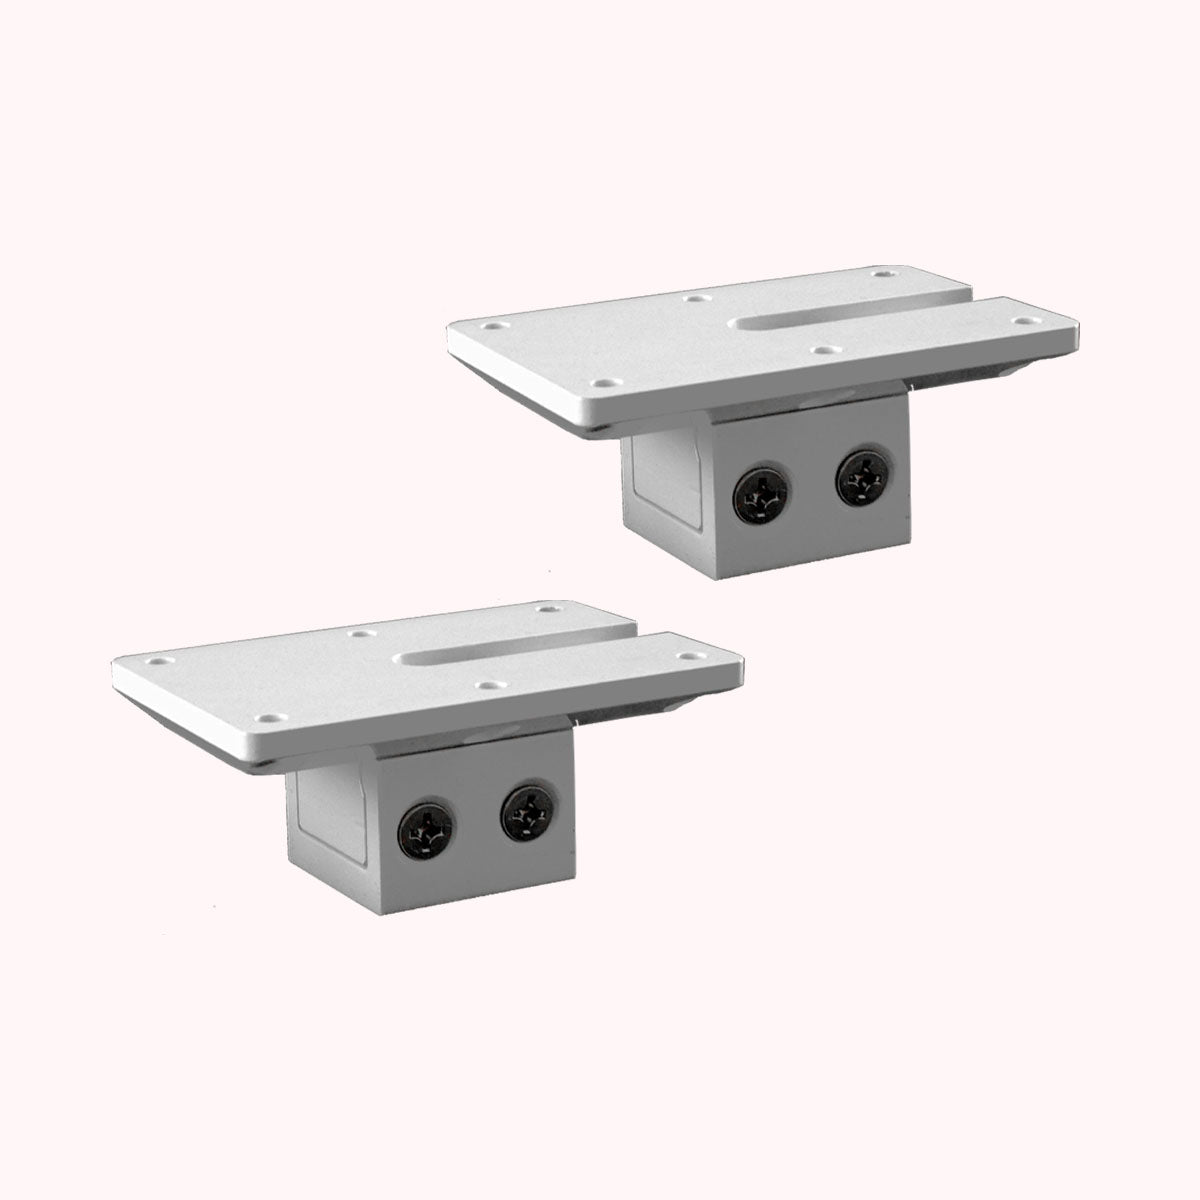 RPM Flat Mount Bracket For Surface/Deck Mount - White